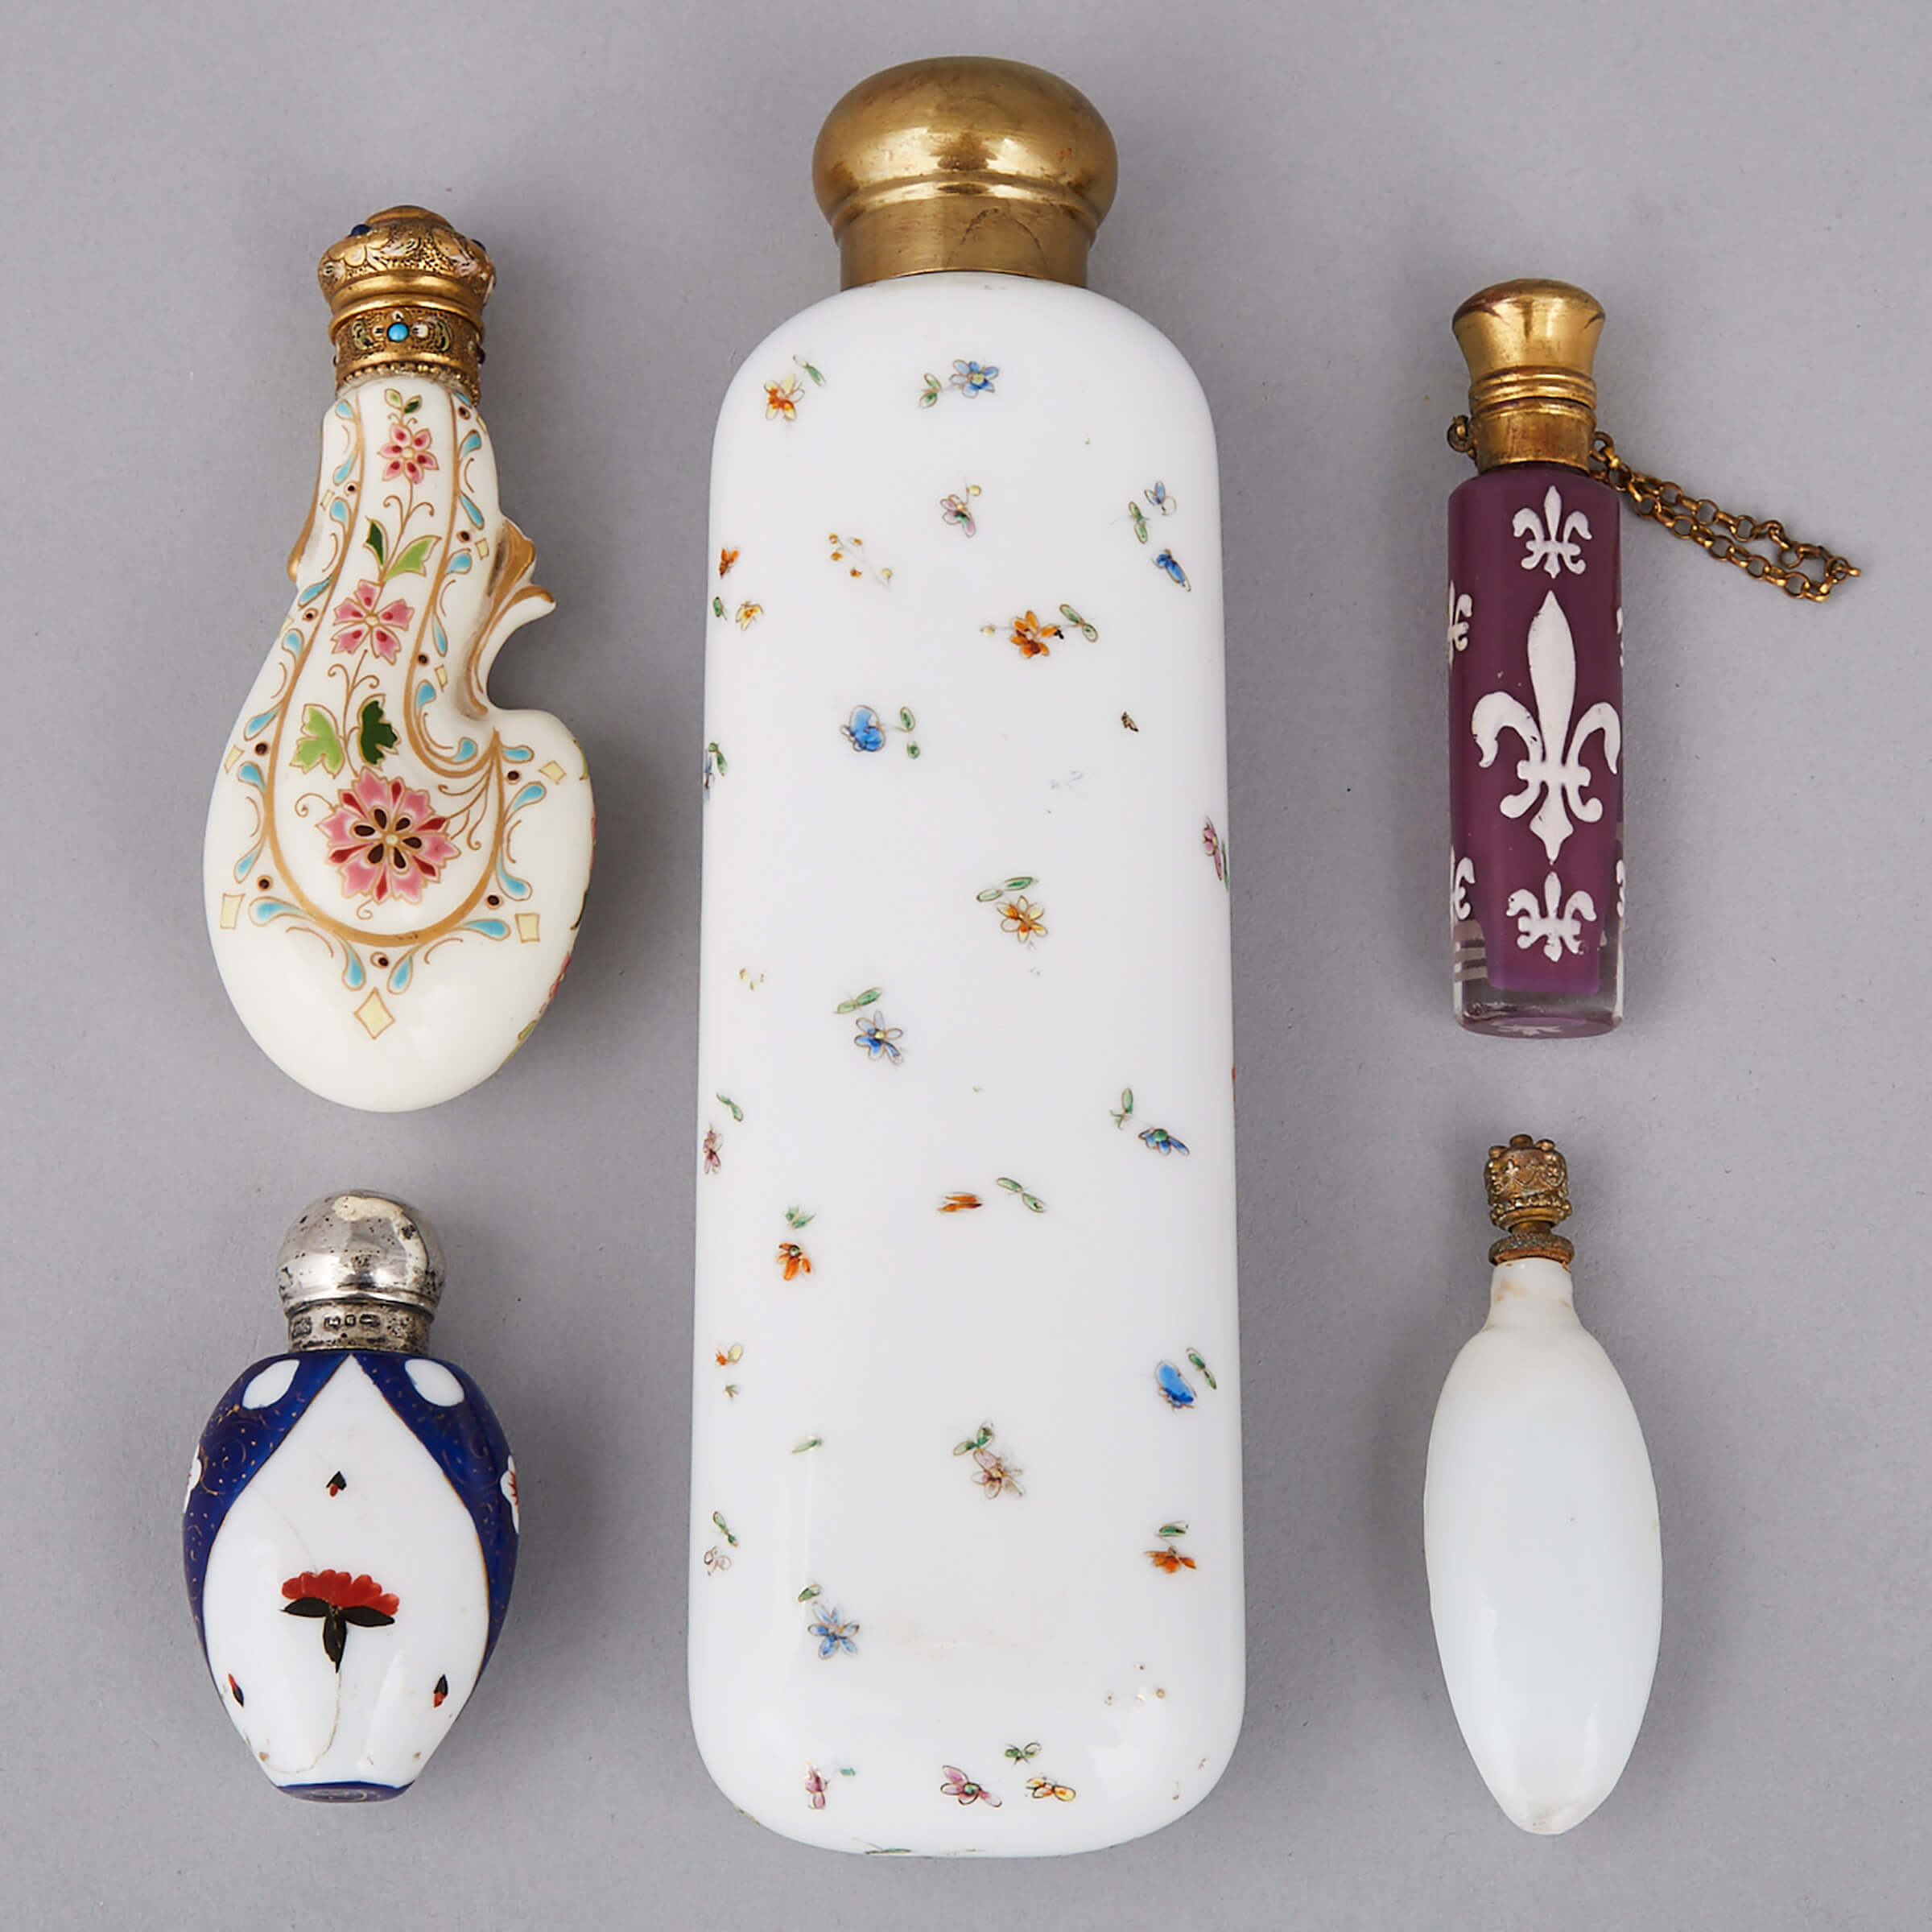 Five Porcelain, Glass, Silver and Metal Mounted Perfume Phials and Toilet Water Bottles, late 19th century